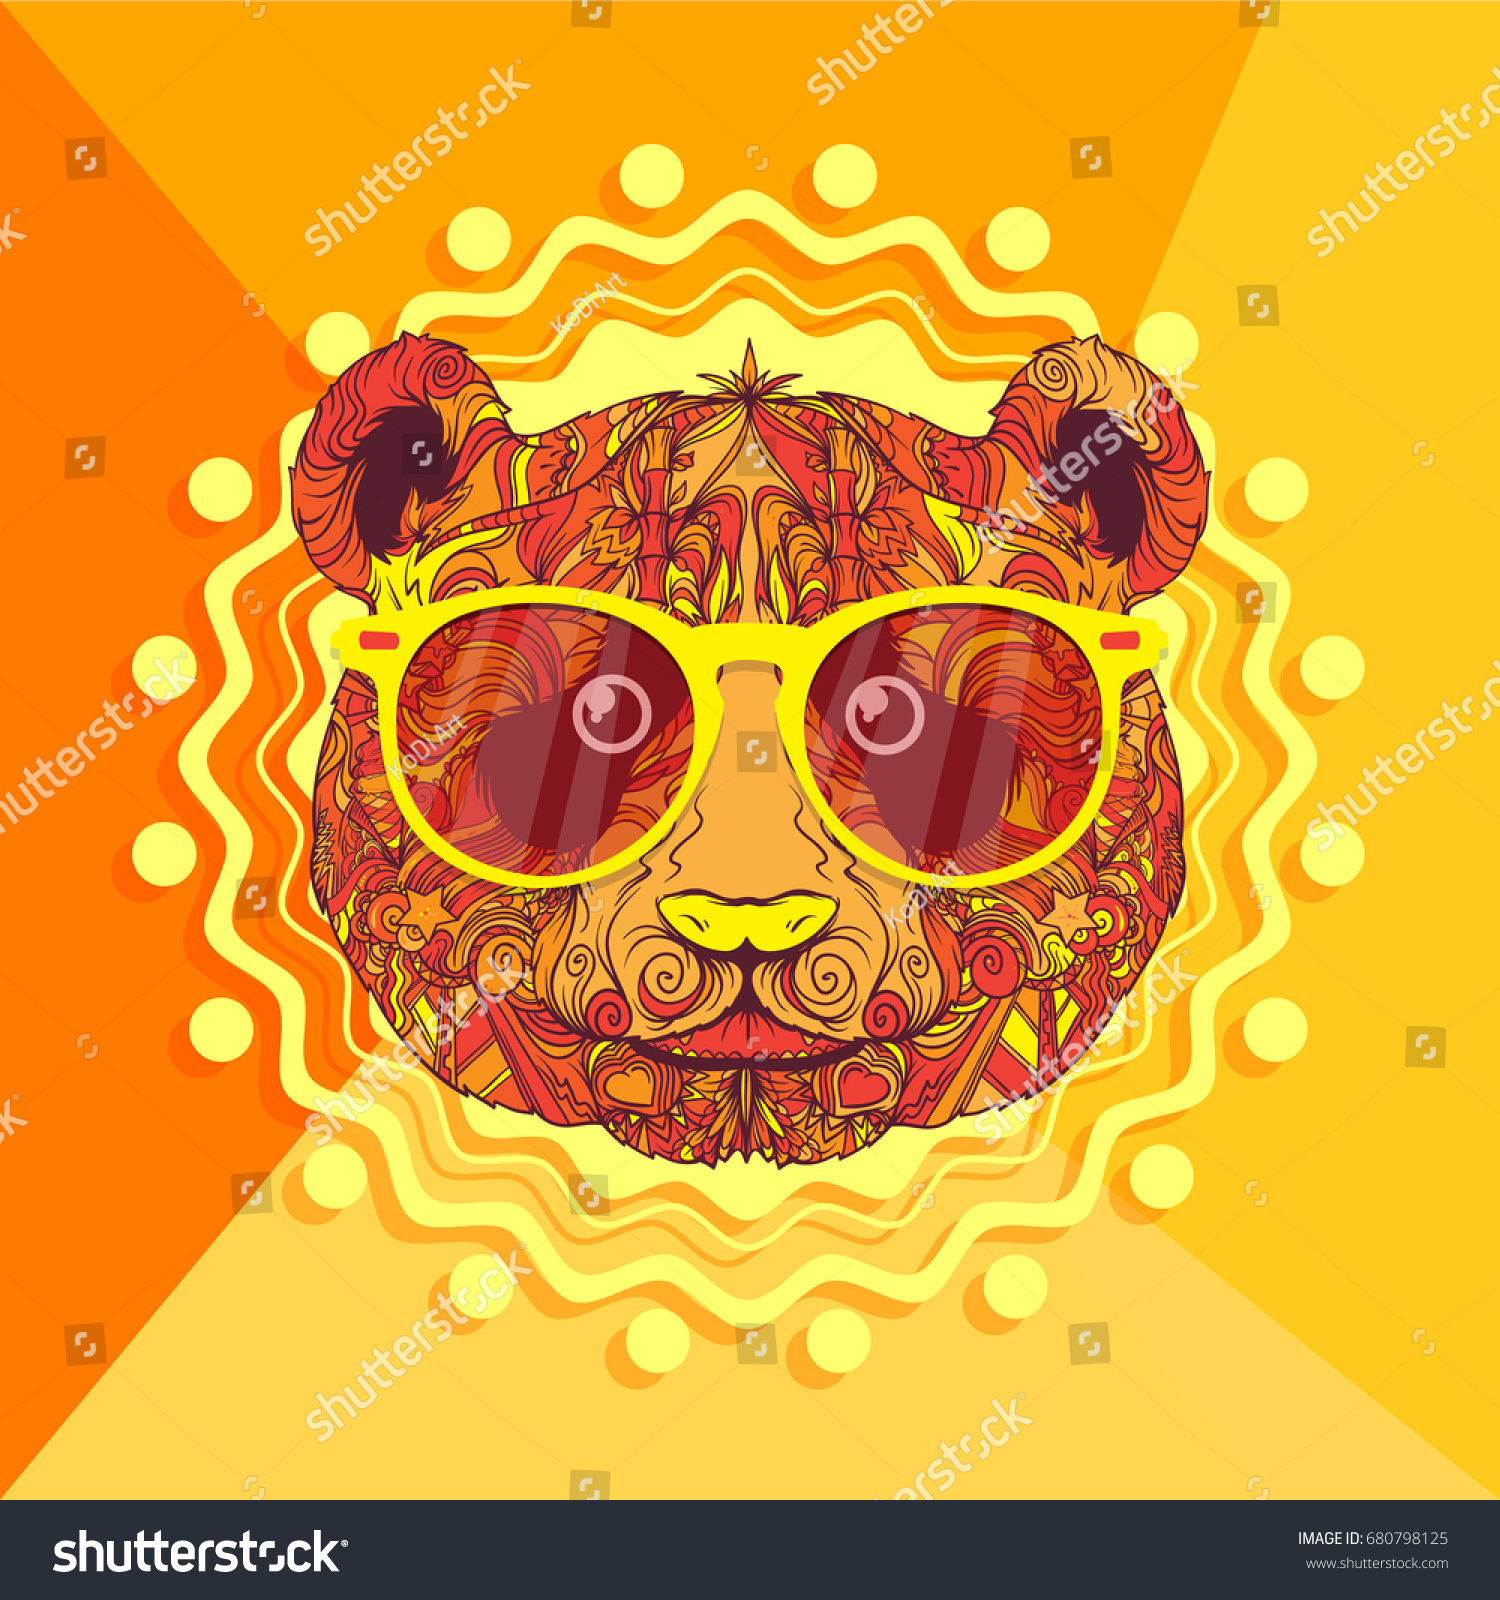 SVG of Ornament face of styled panda with yellow fashion eyeglasses, vector illustration isolated on yellow abstract background, mandala style, line art svg